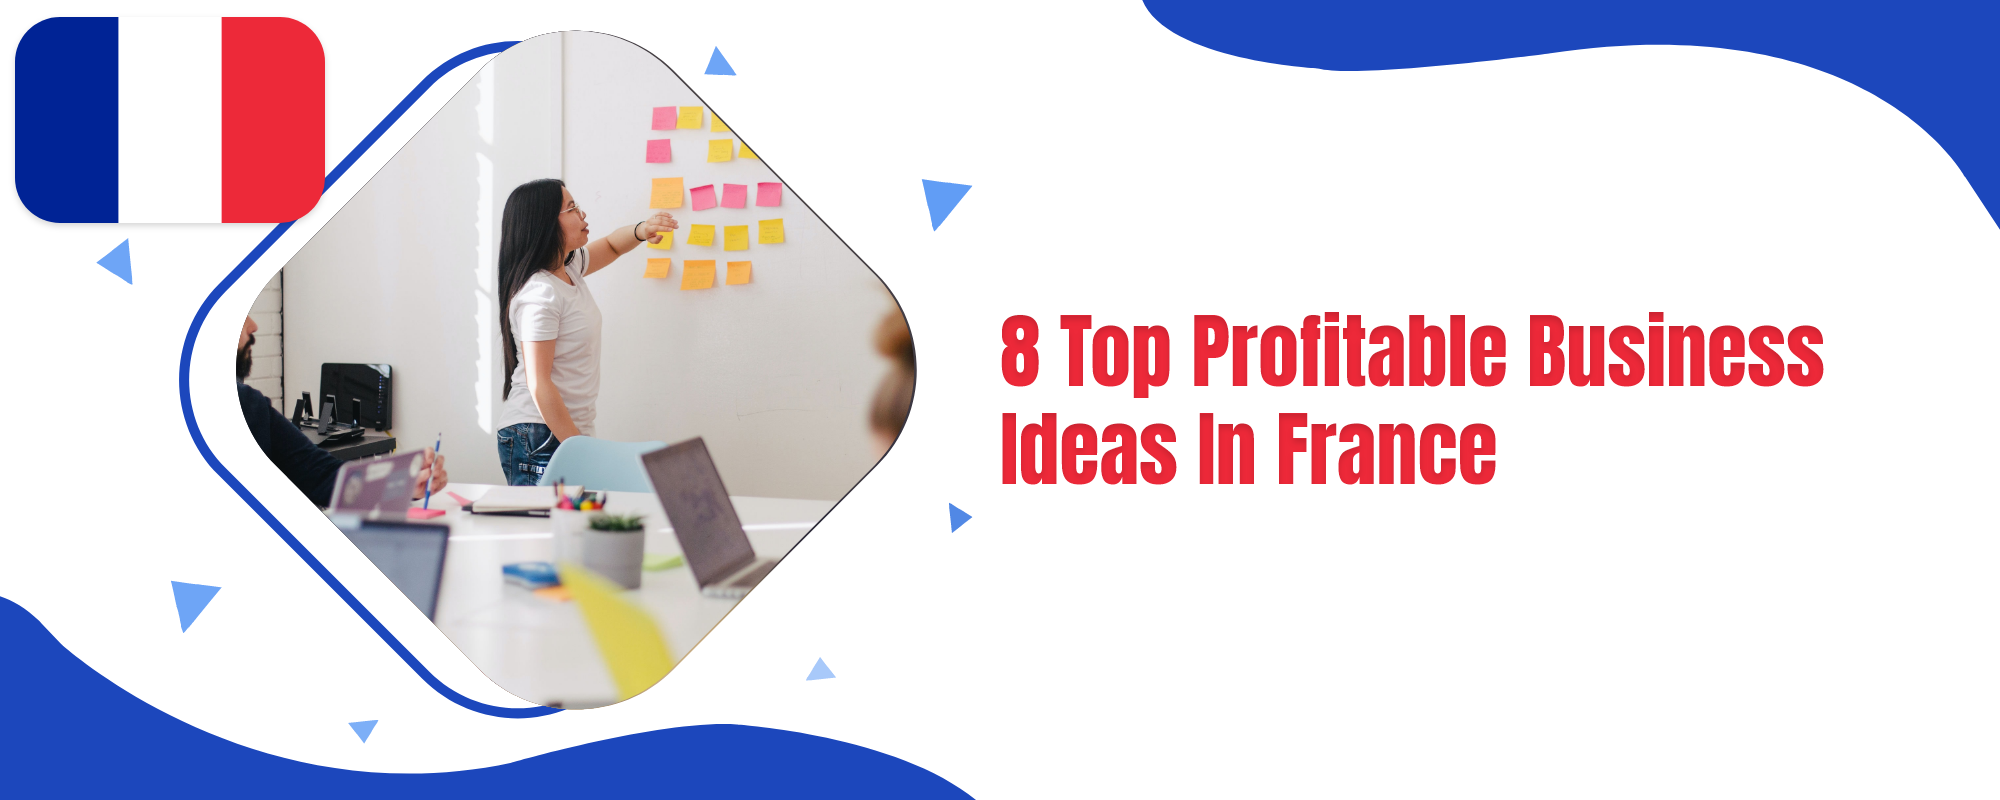 Profitable business ideas in France